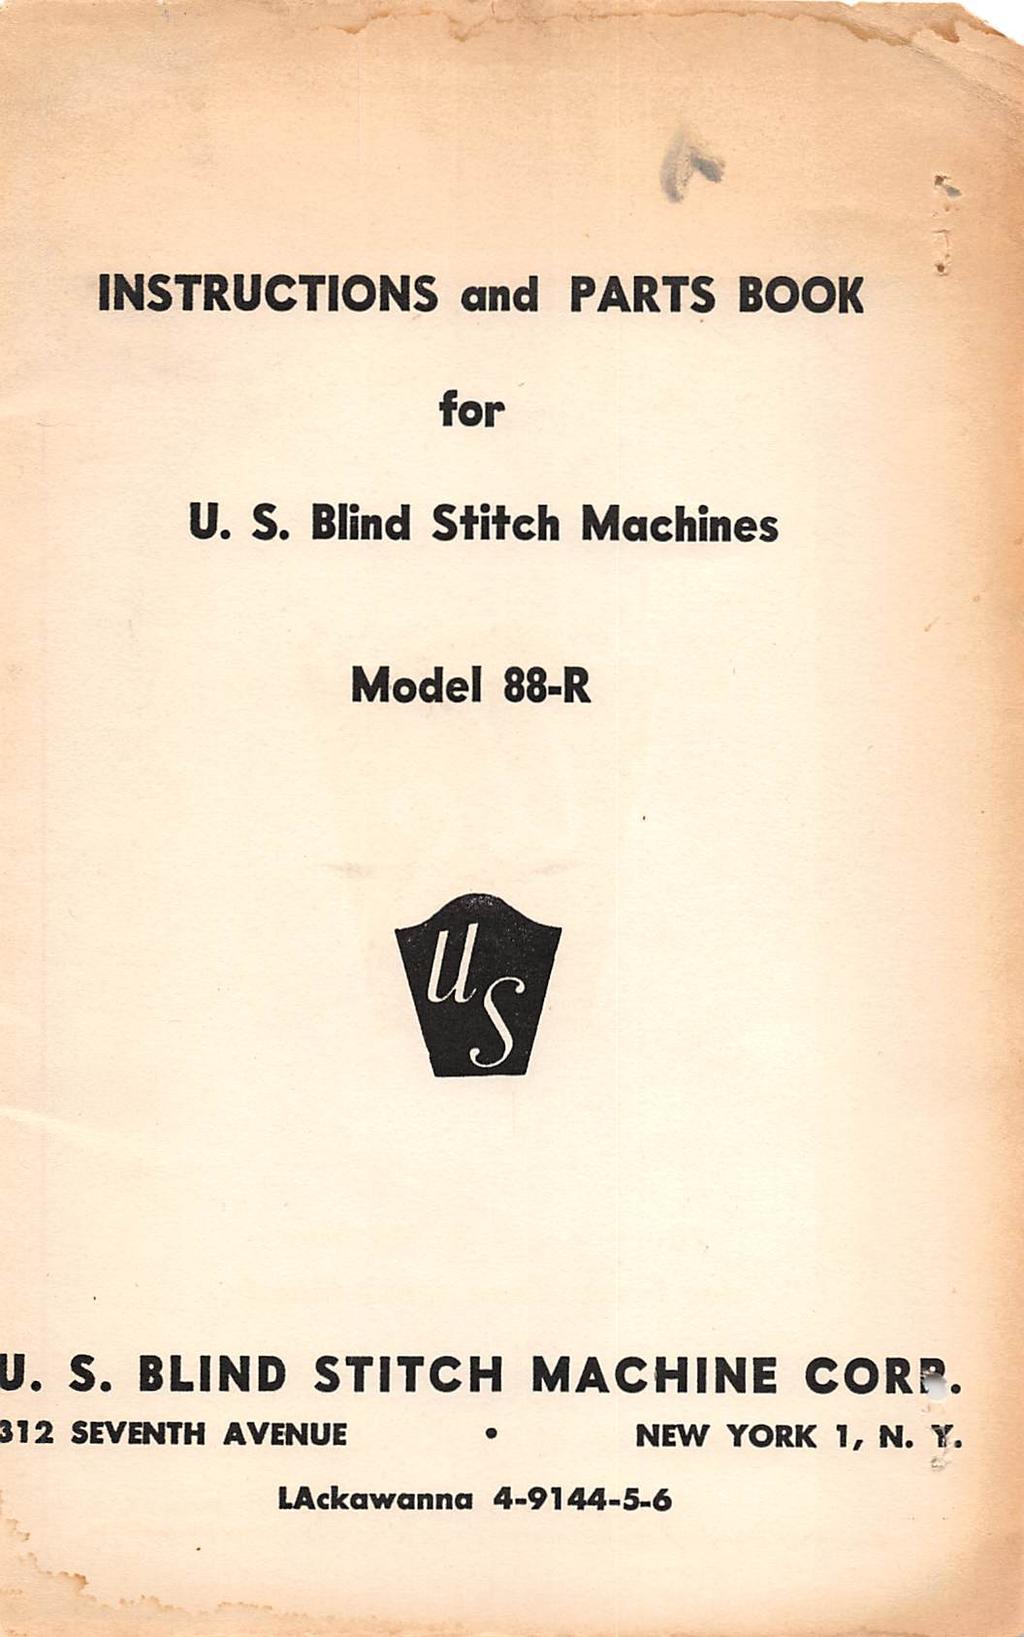 r- INSTRUCTIONS and PARTS BOOK for U. S. Blind Stitch Machines Model 88-R. S. BLIND STITCH MACHINE CORP.